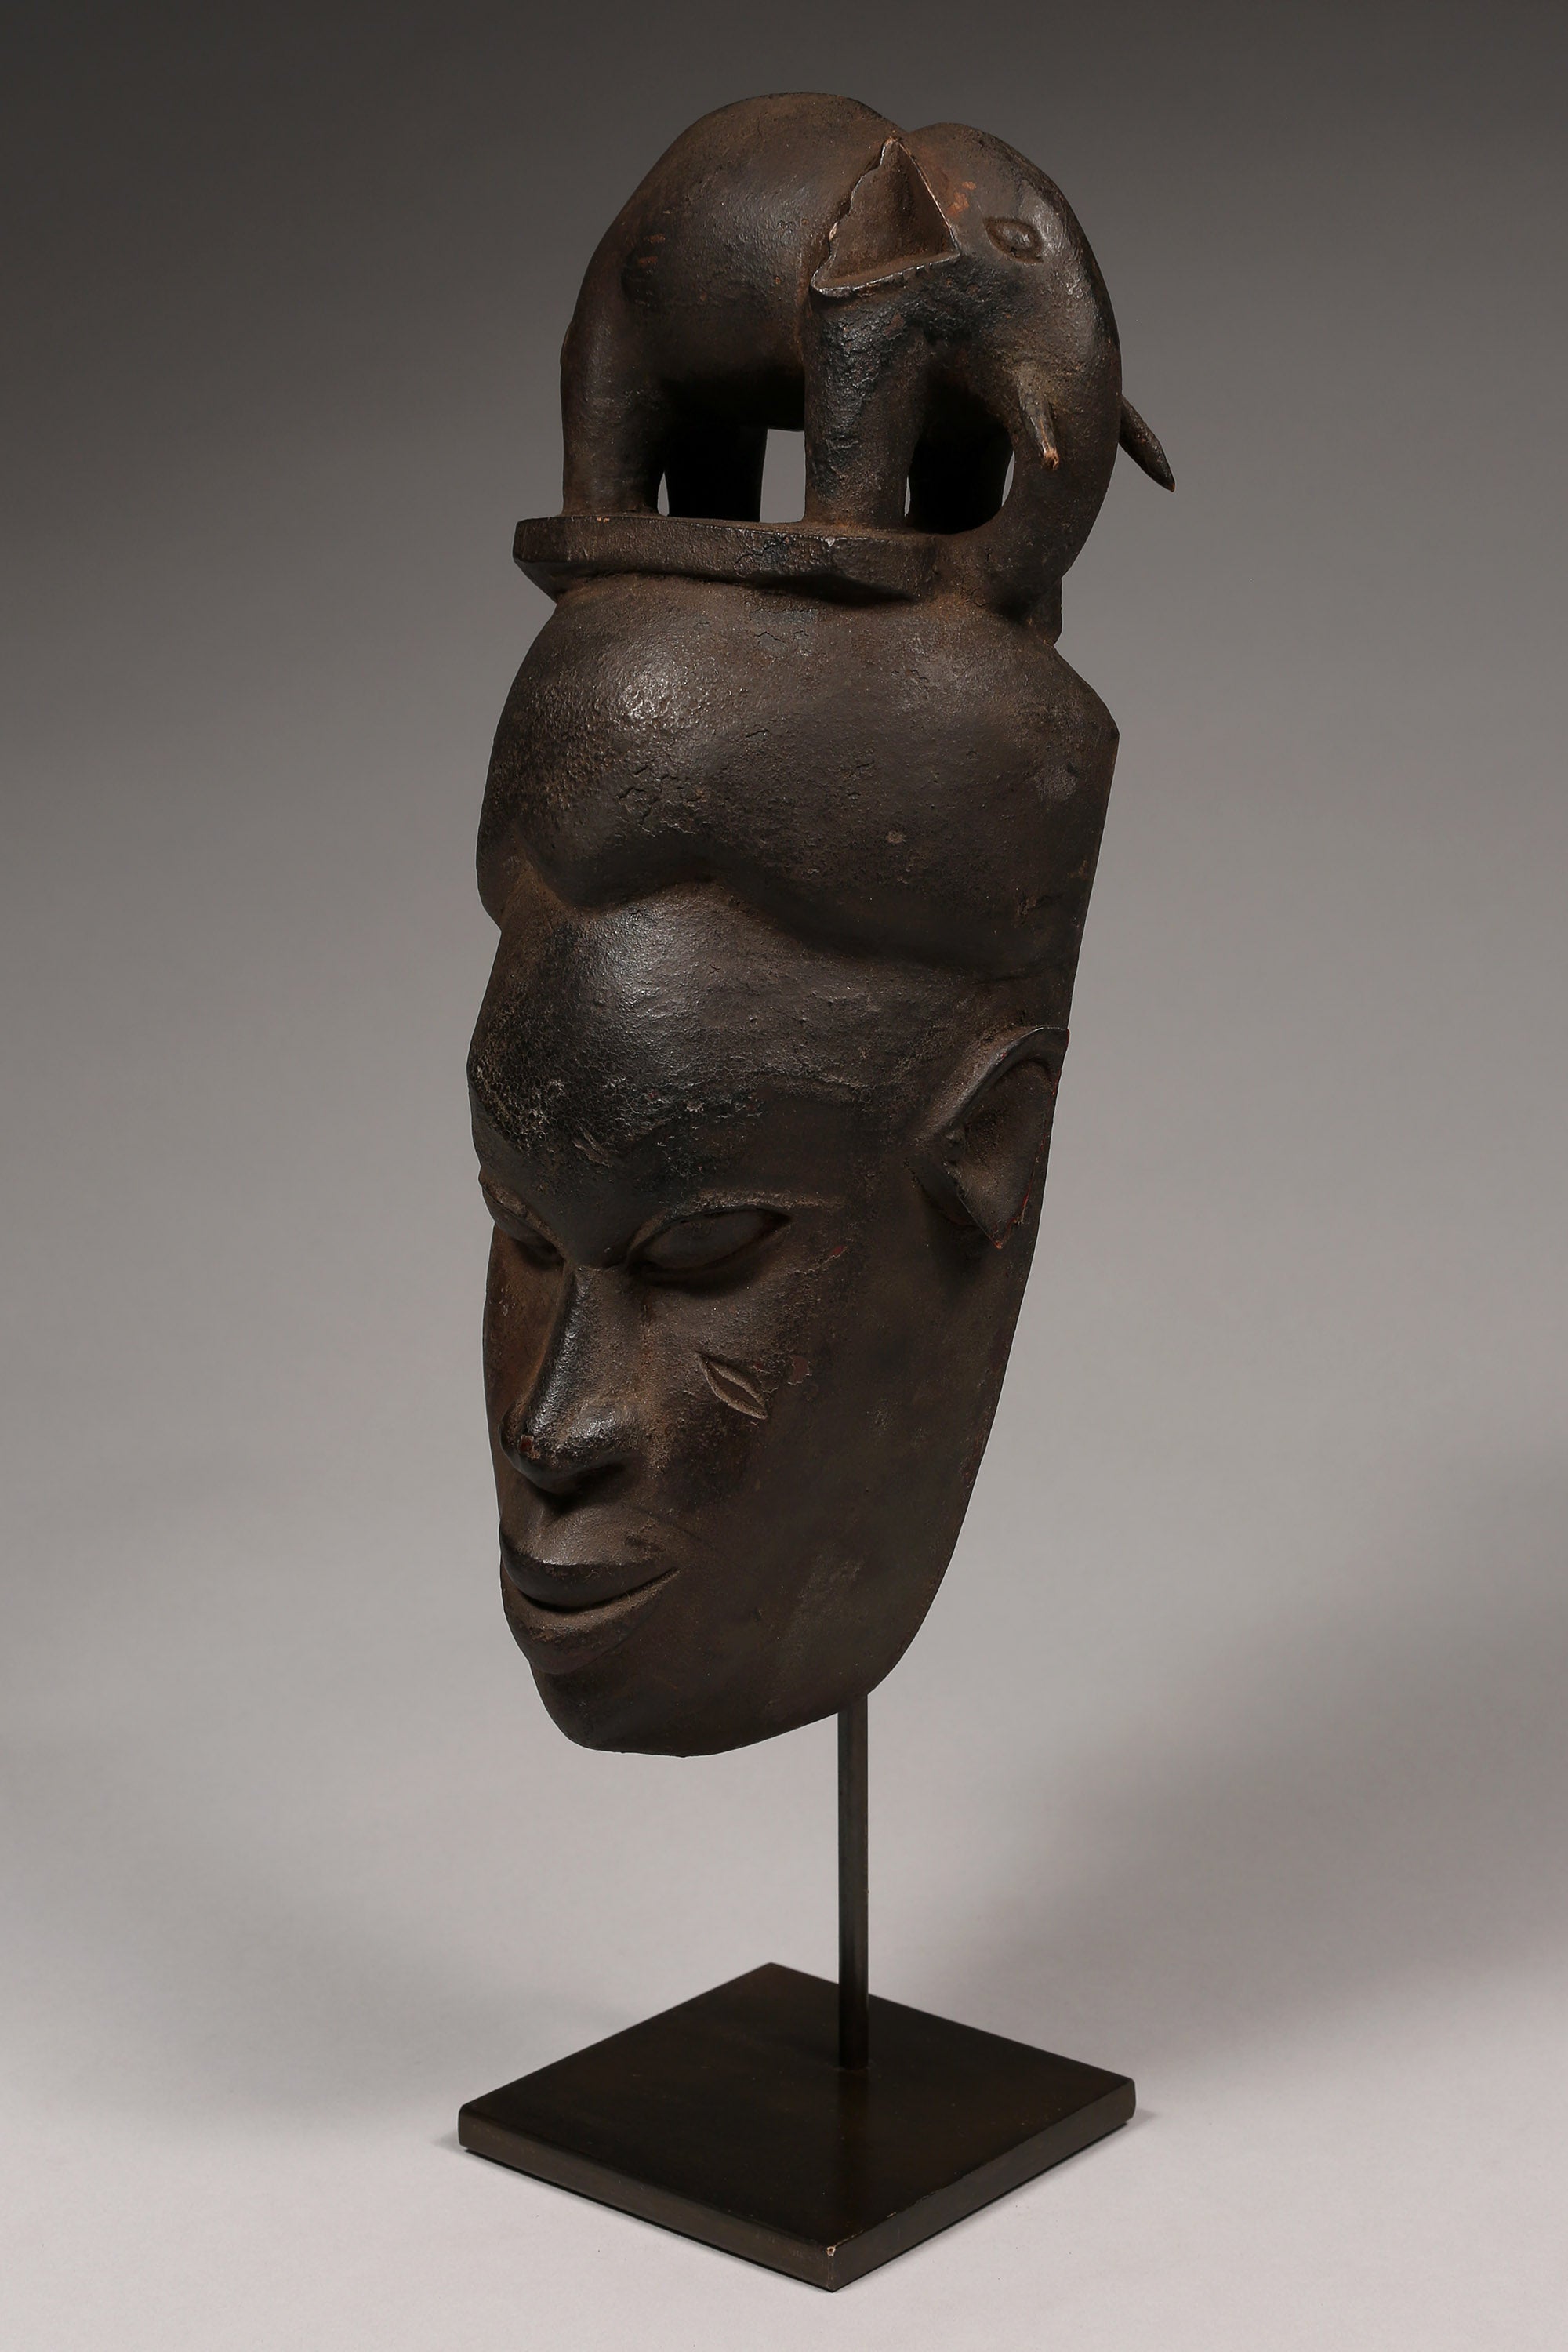 Tribal Masks; Original sculptures and statuary, in any material; Handcrafted; Traditional; Folk Art; Collection; Artifacts;Of an age exceeding 100 years;Kpan Mask, Baule African Art, Carved Wood